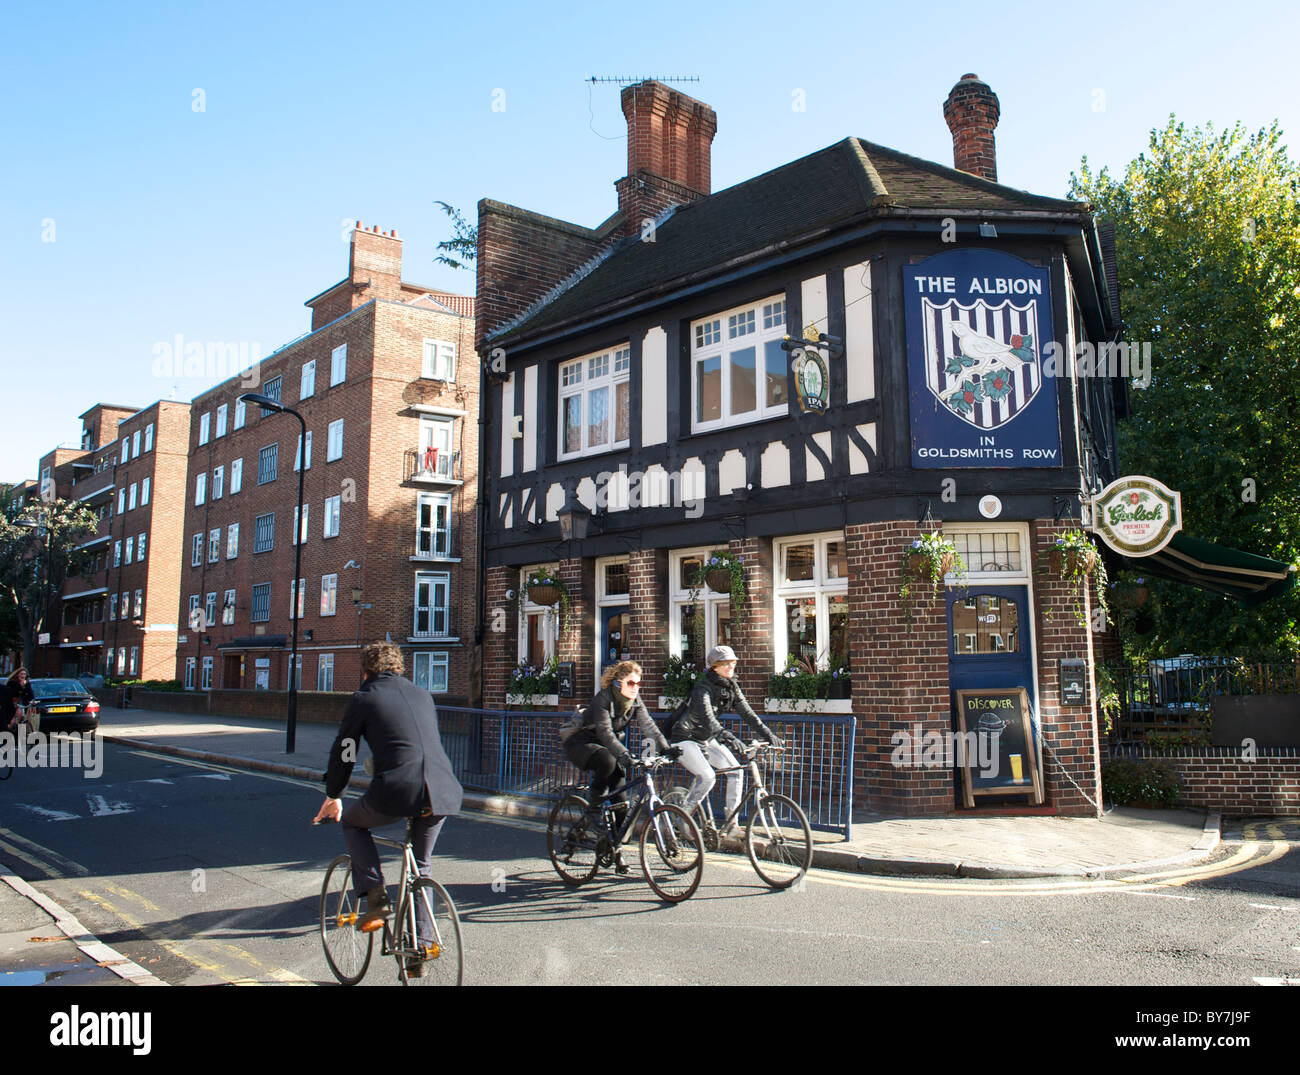 The ALBION football pub on Goldsmith's Row, Bethnal Green East London Stock Photo